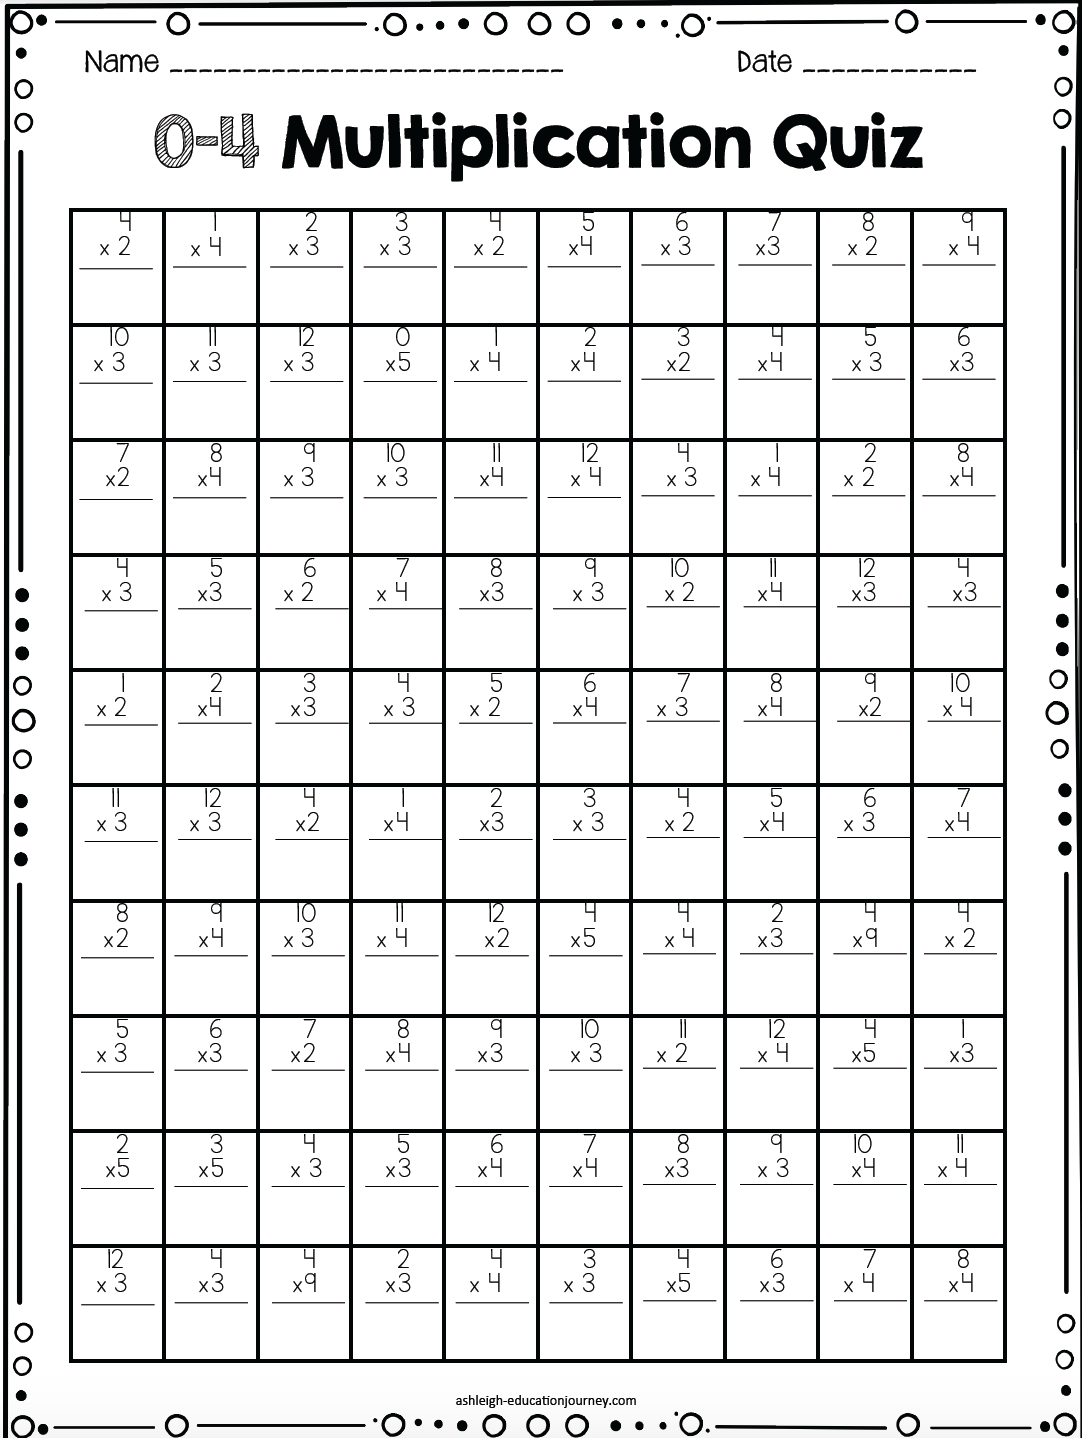  Multiplication Facts Quiz Printable